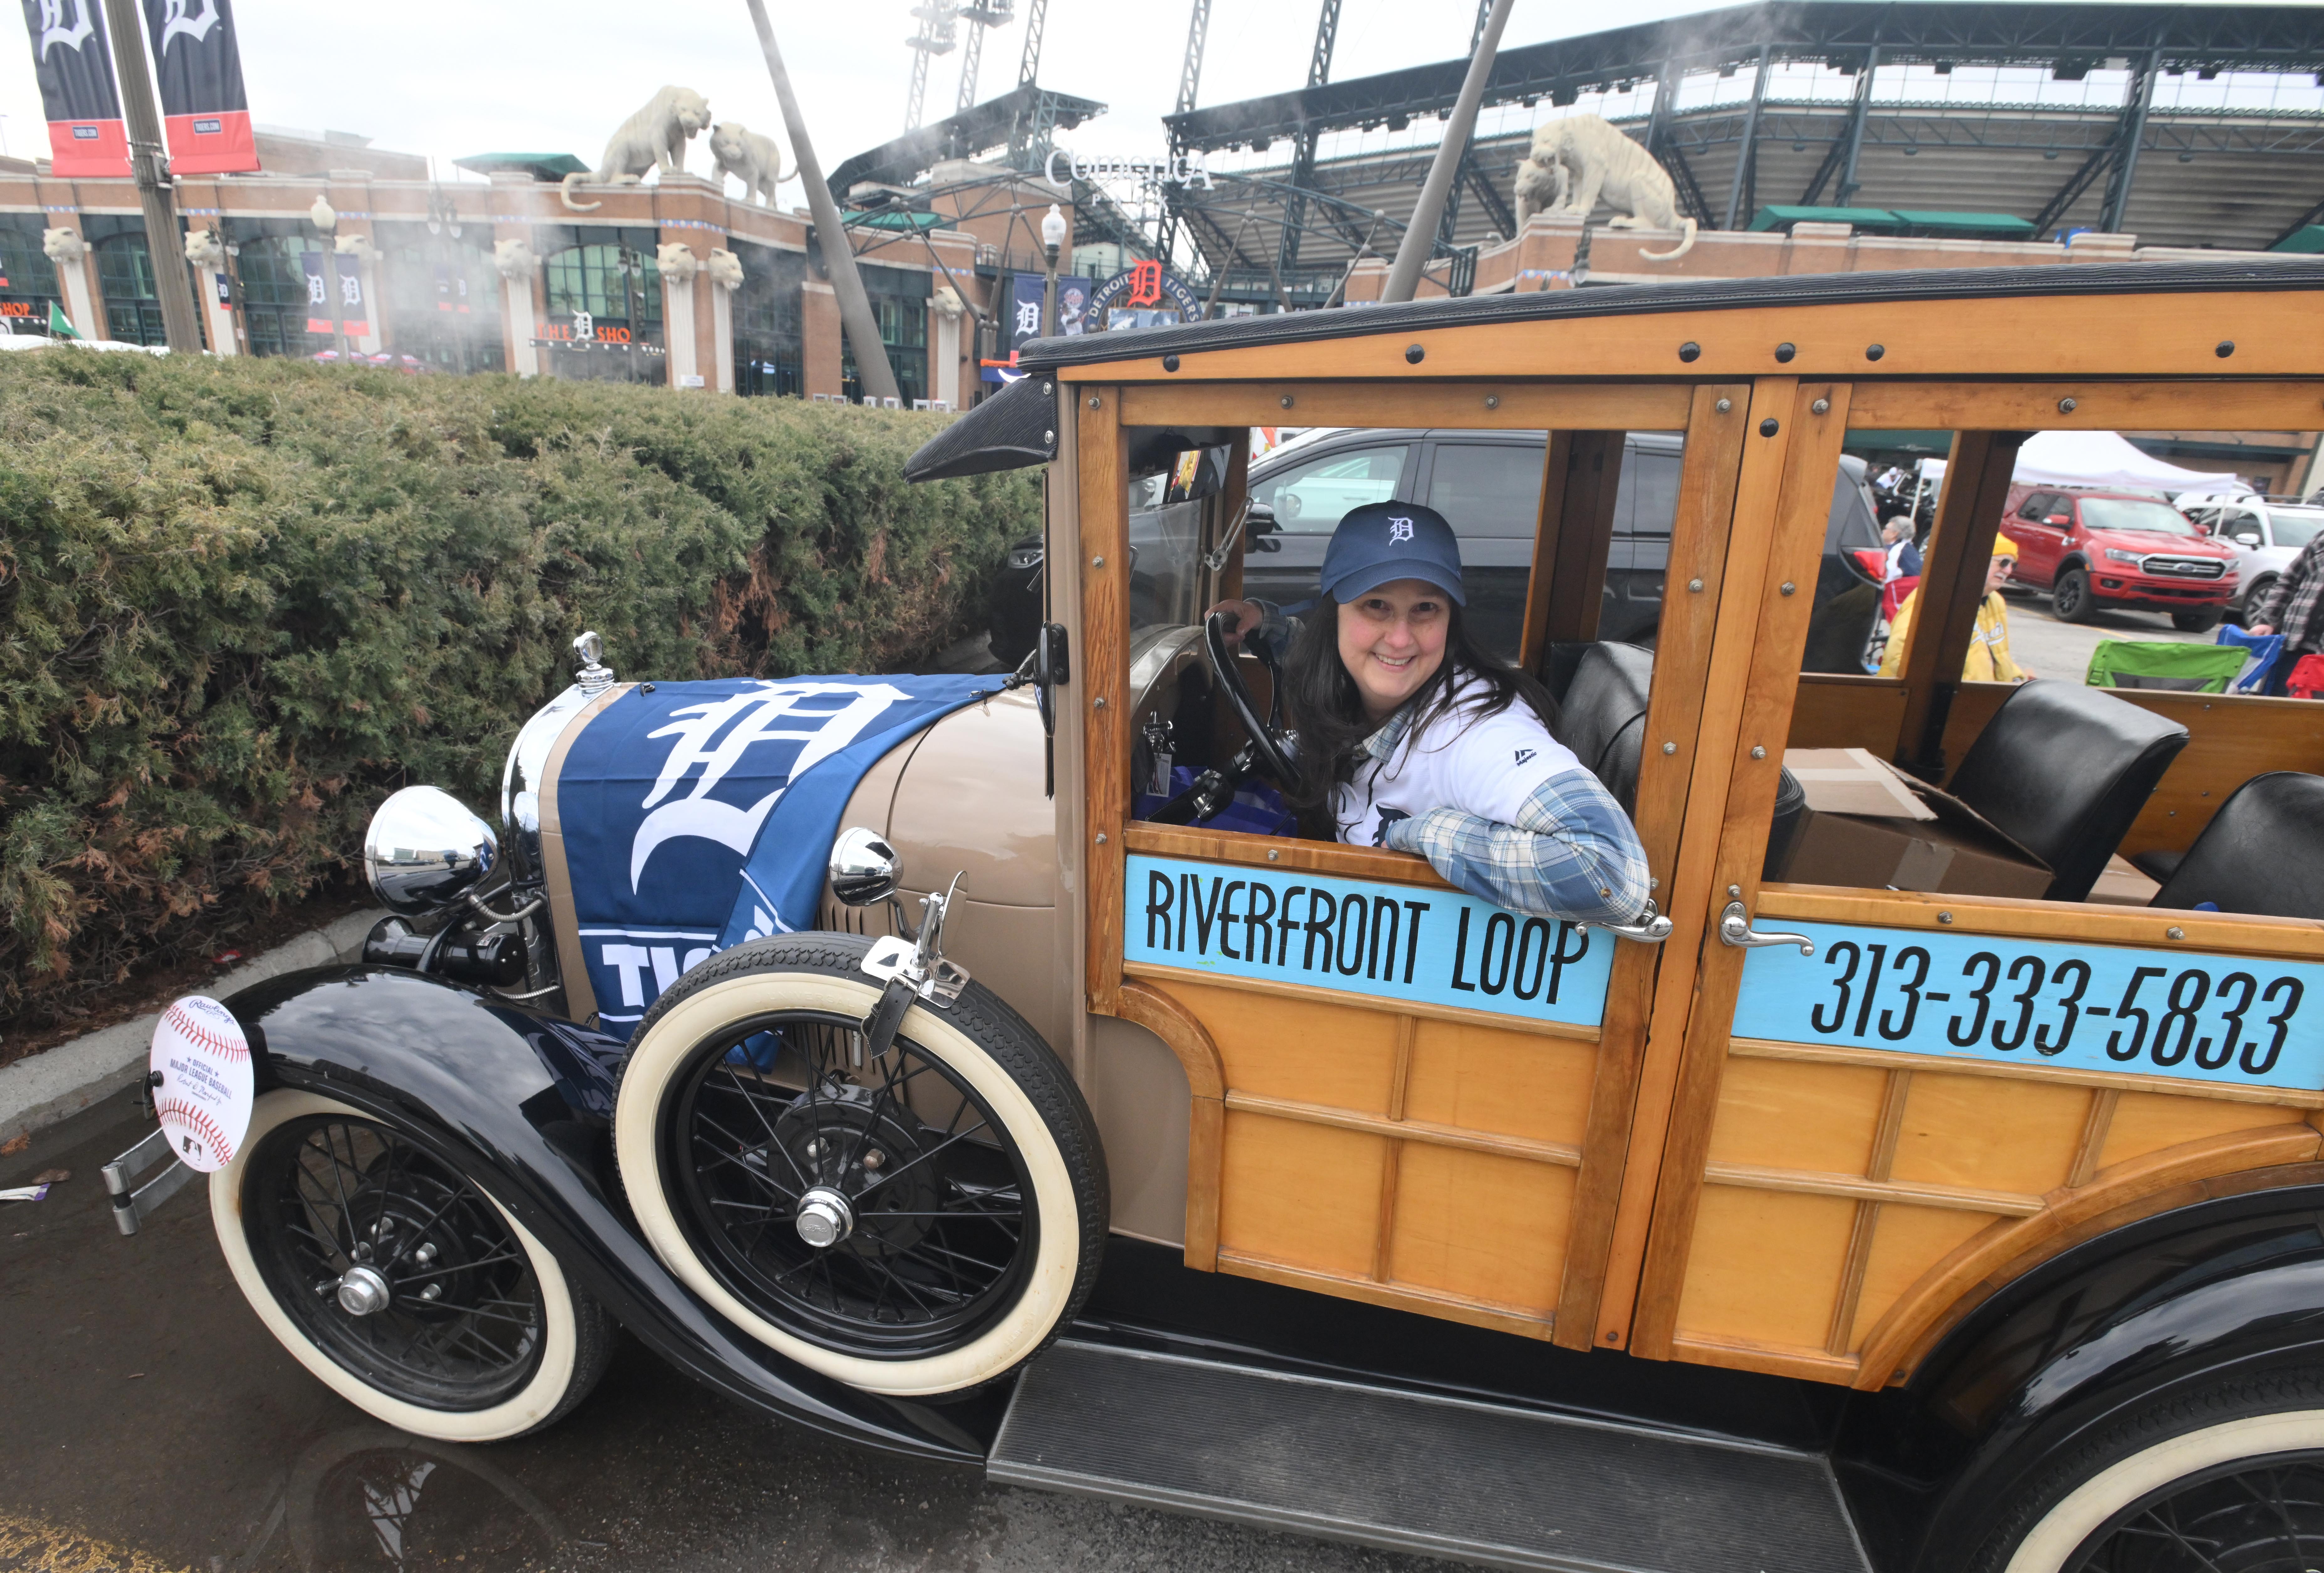 LIsa Stolarski of Antique Touring.com sits in style in front of Comerica Park before the Detroit Tigers opening day game. Detroit Tigers home opener at Comerica Park in Detroit, Michigan on April 6, 2023.